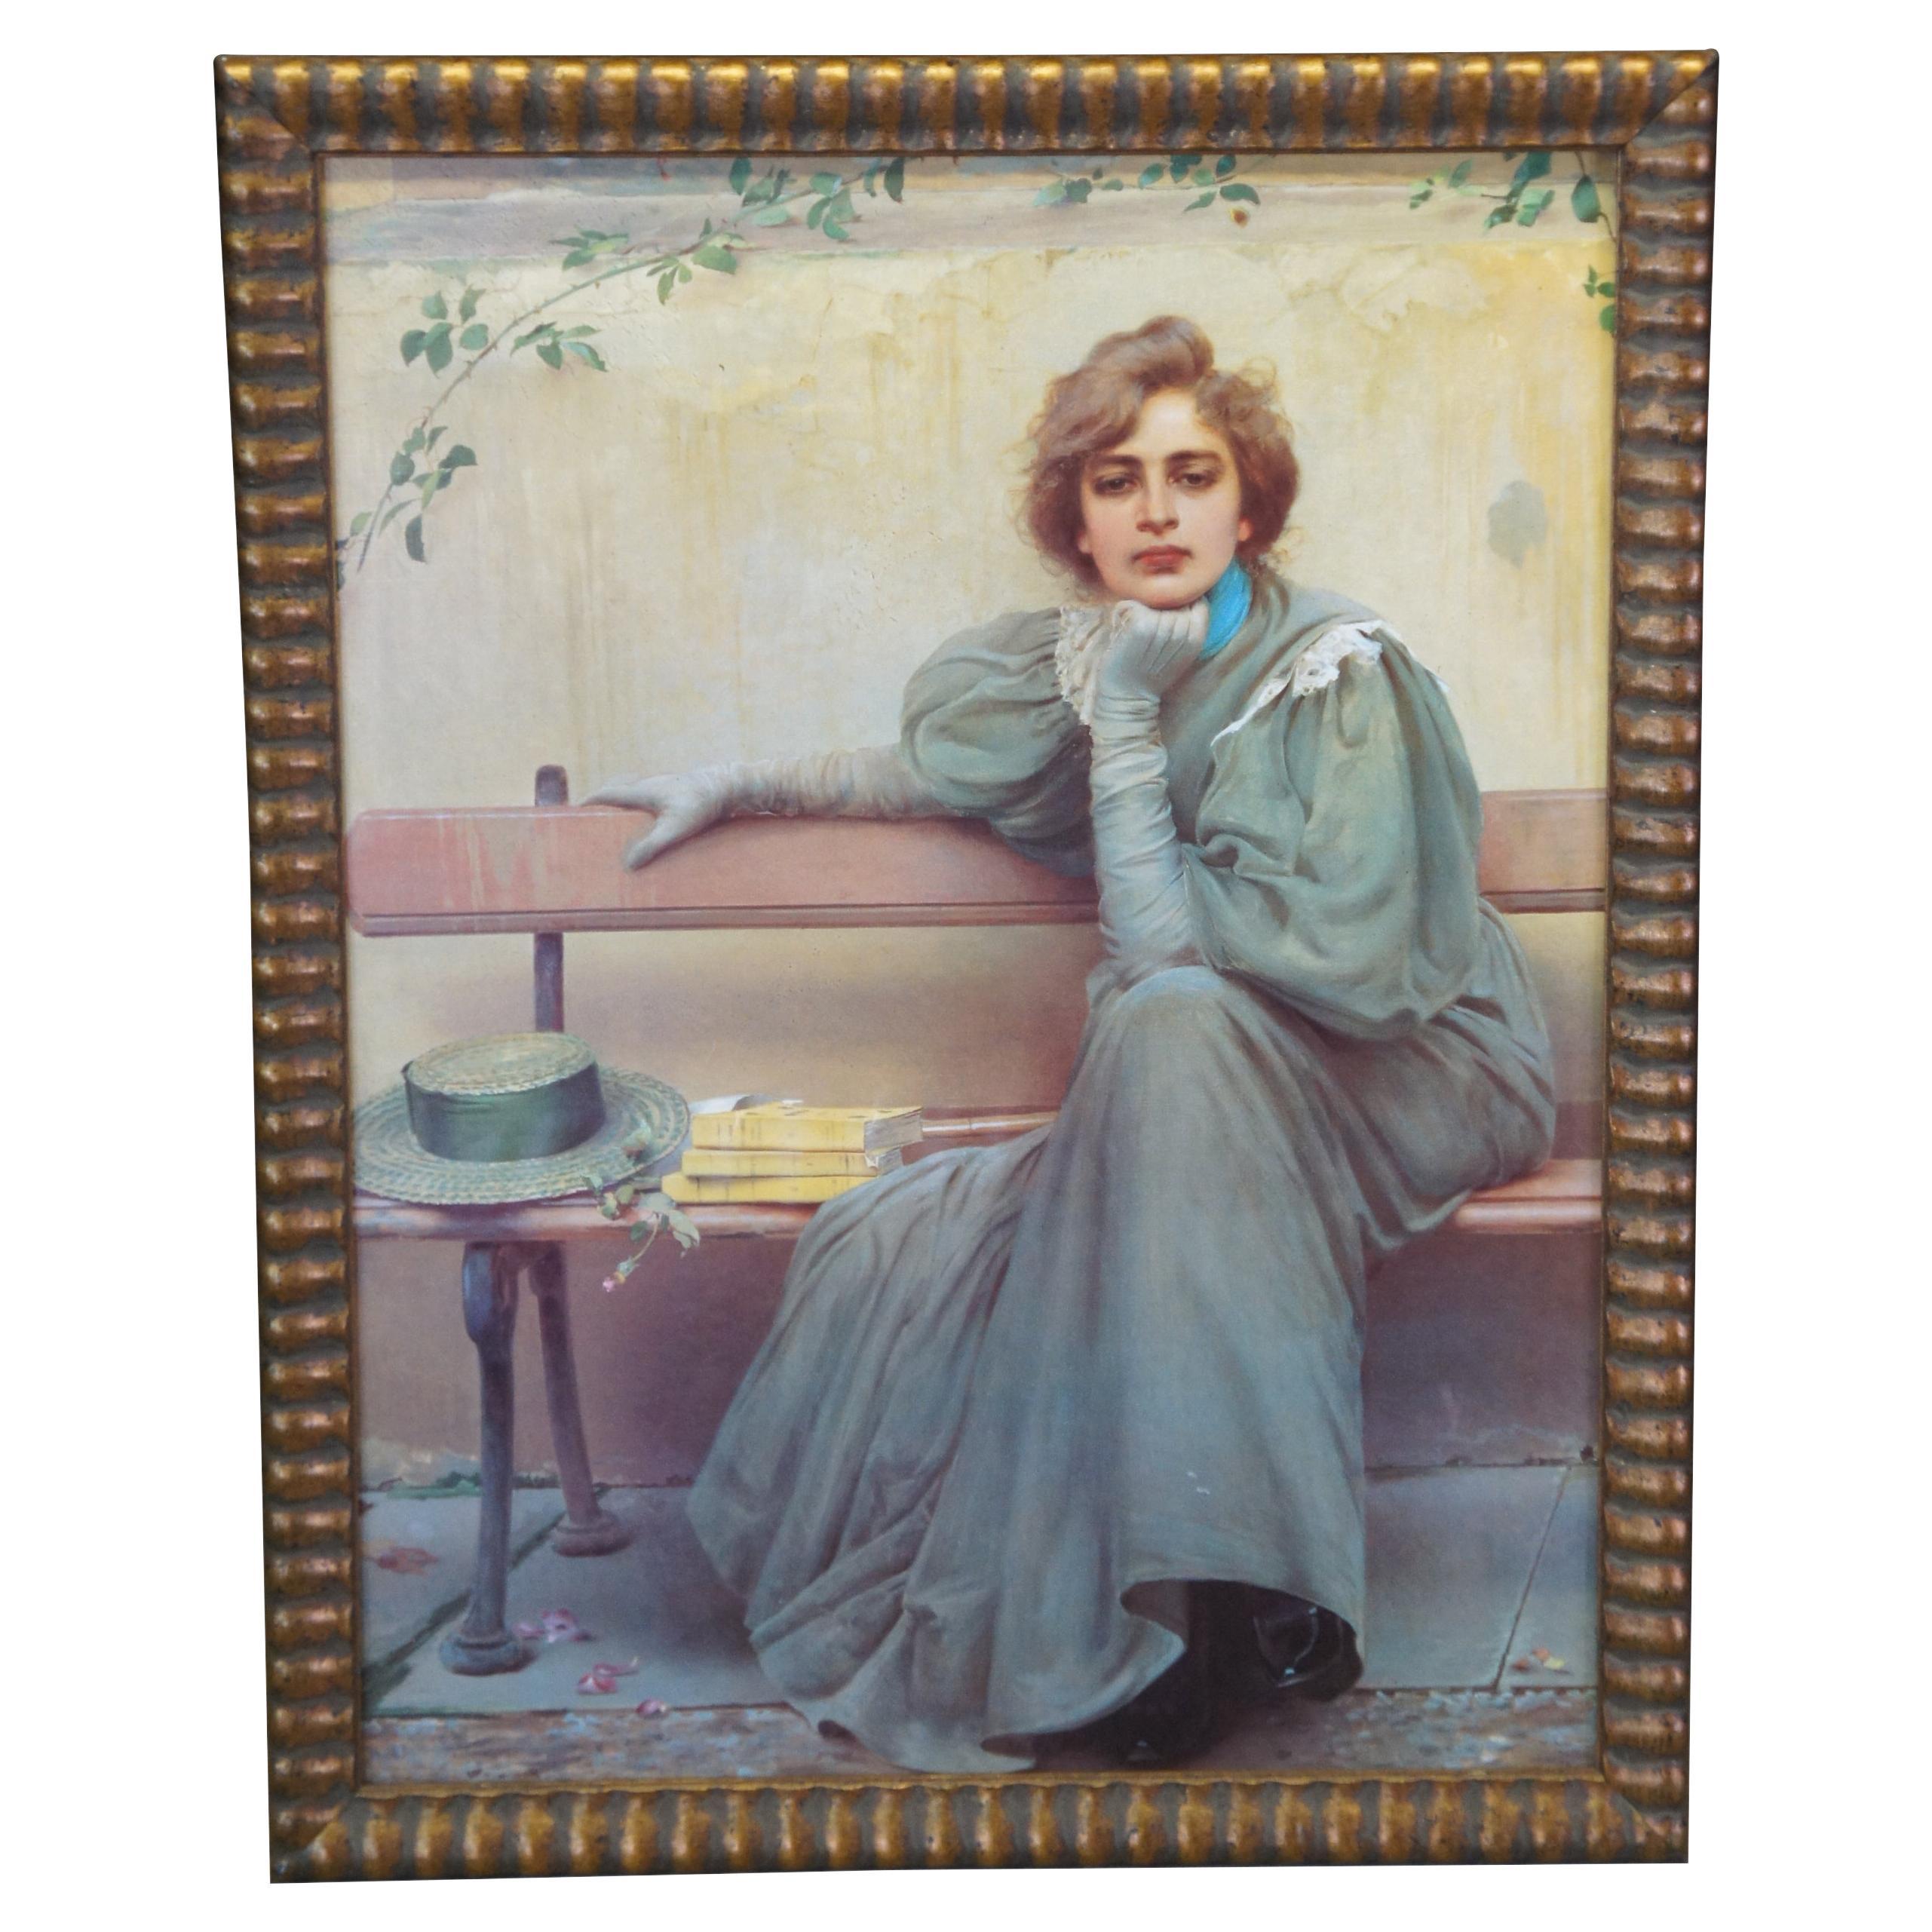 Vintage Vittorio Matteo Corcos Dreams Woman on Bench Print on Board 30"